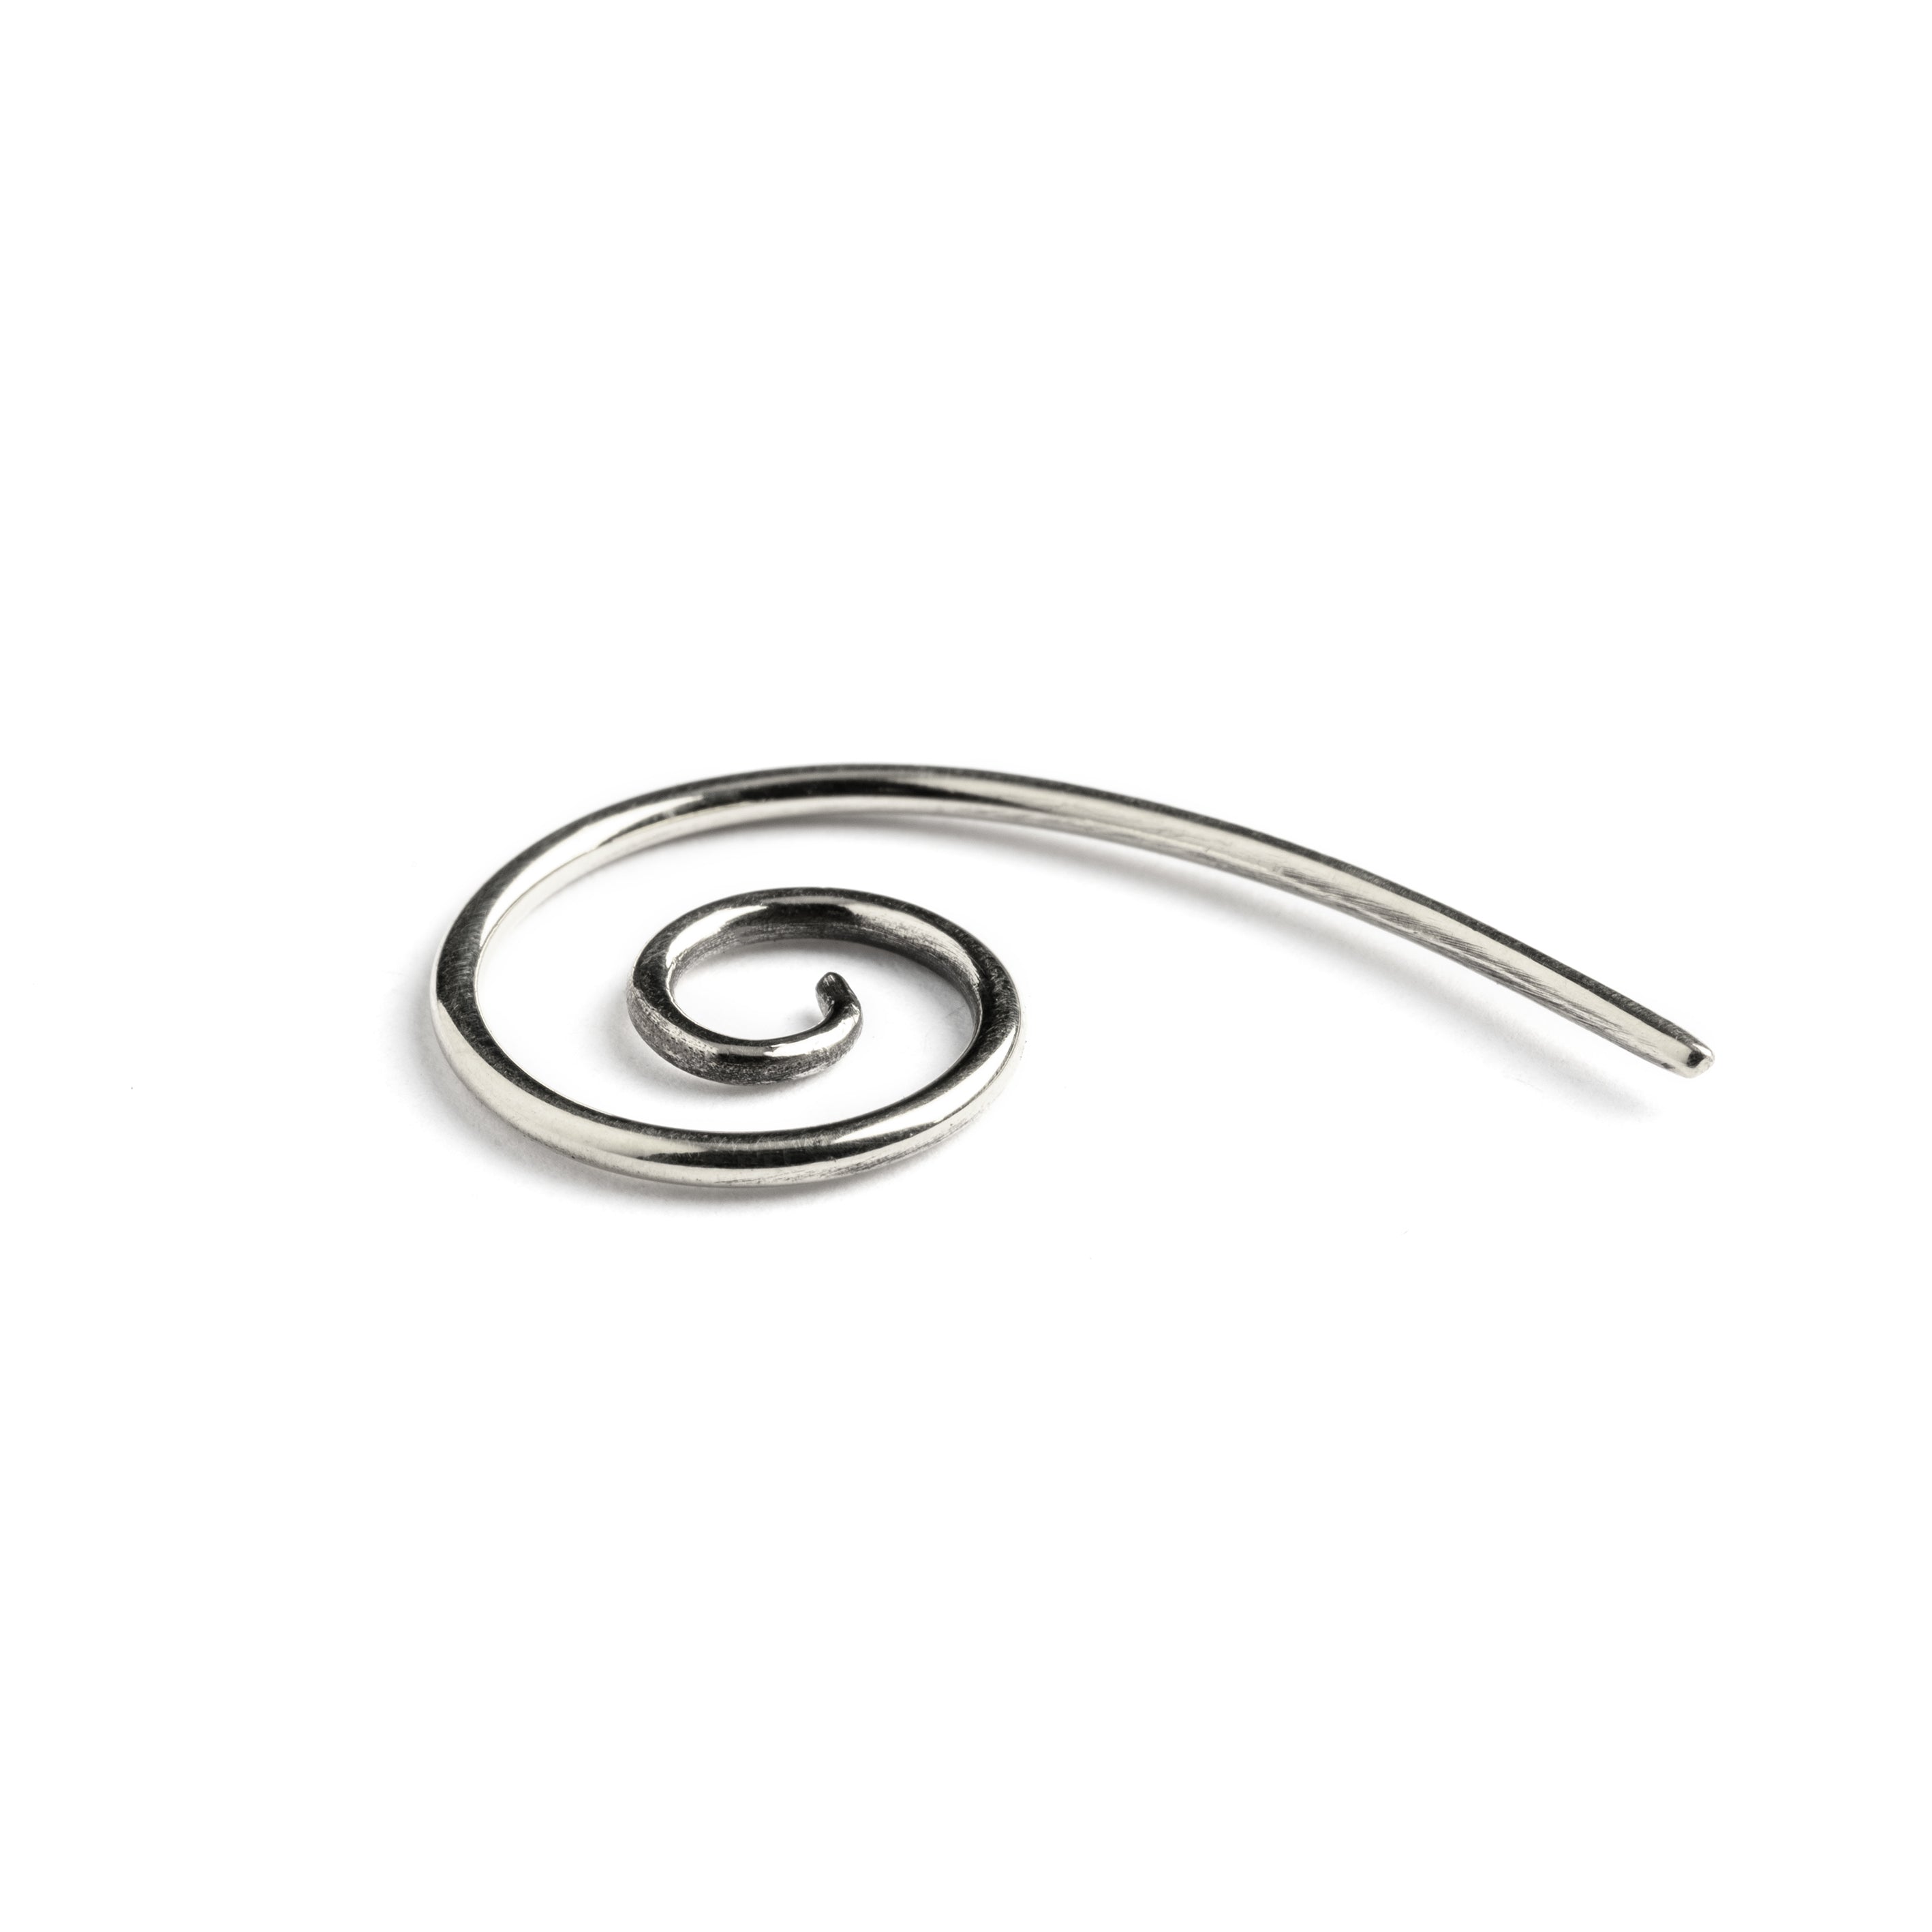 single silver spiral hook earring front view